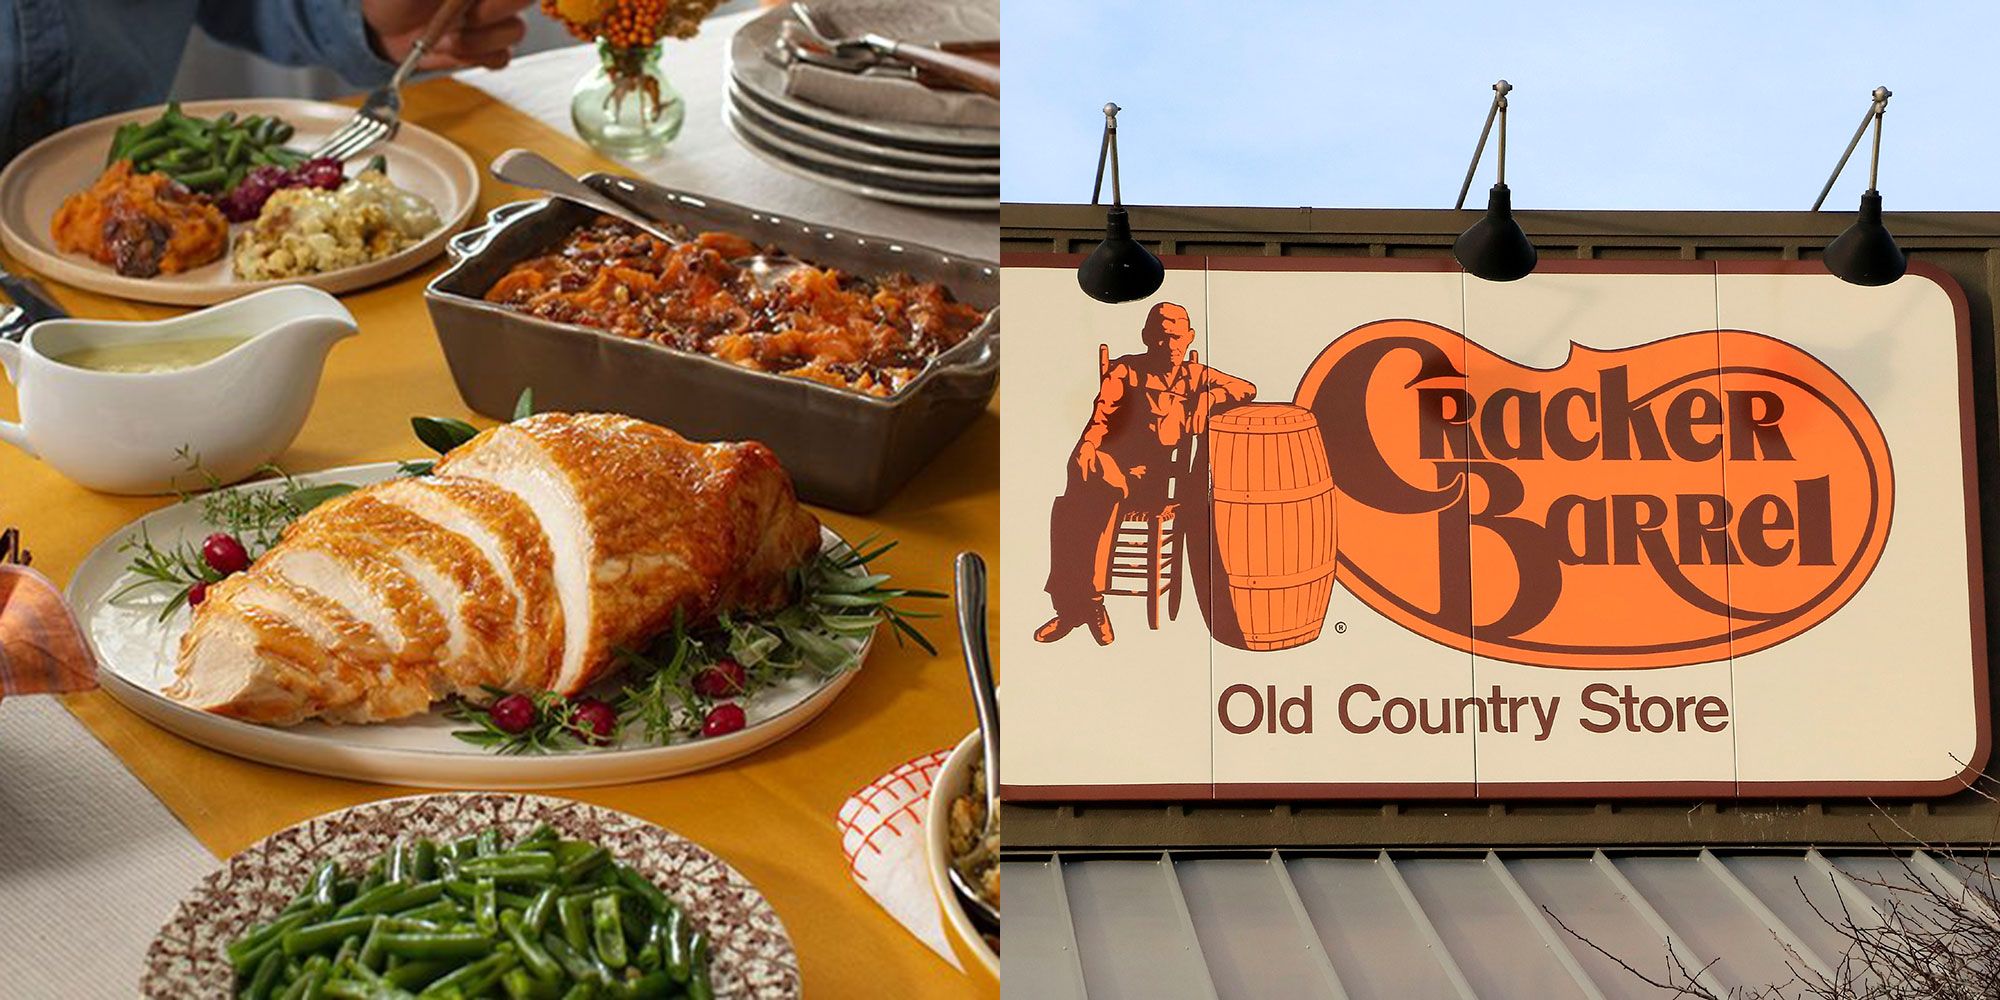 Cracker Barrel Thanksgiving dinner to go 2023: Here's what on the menu